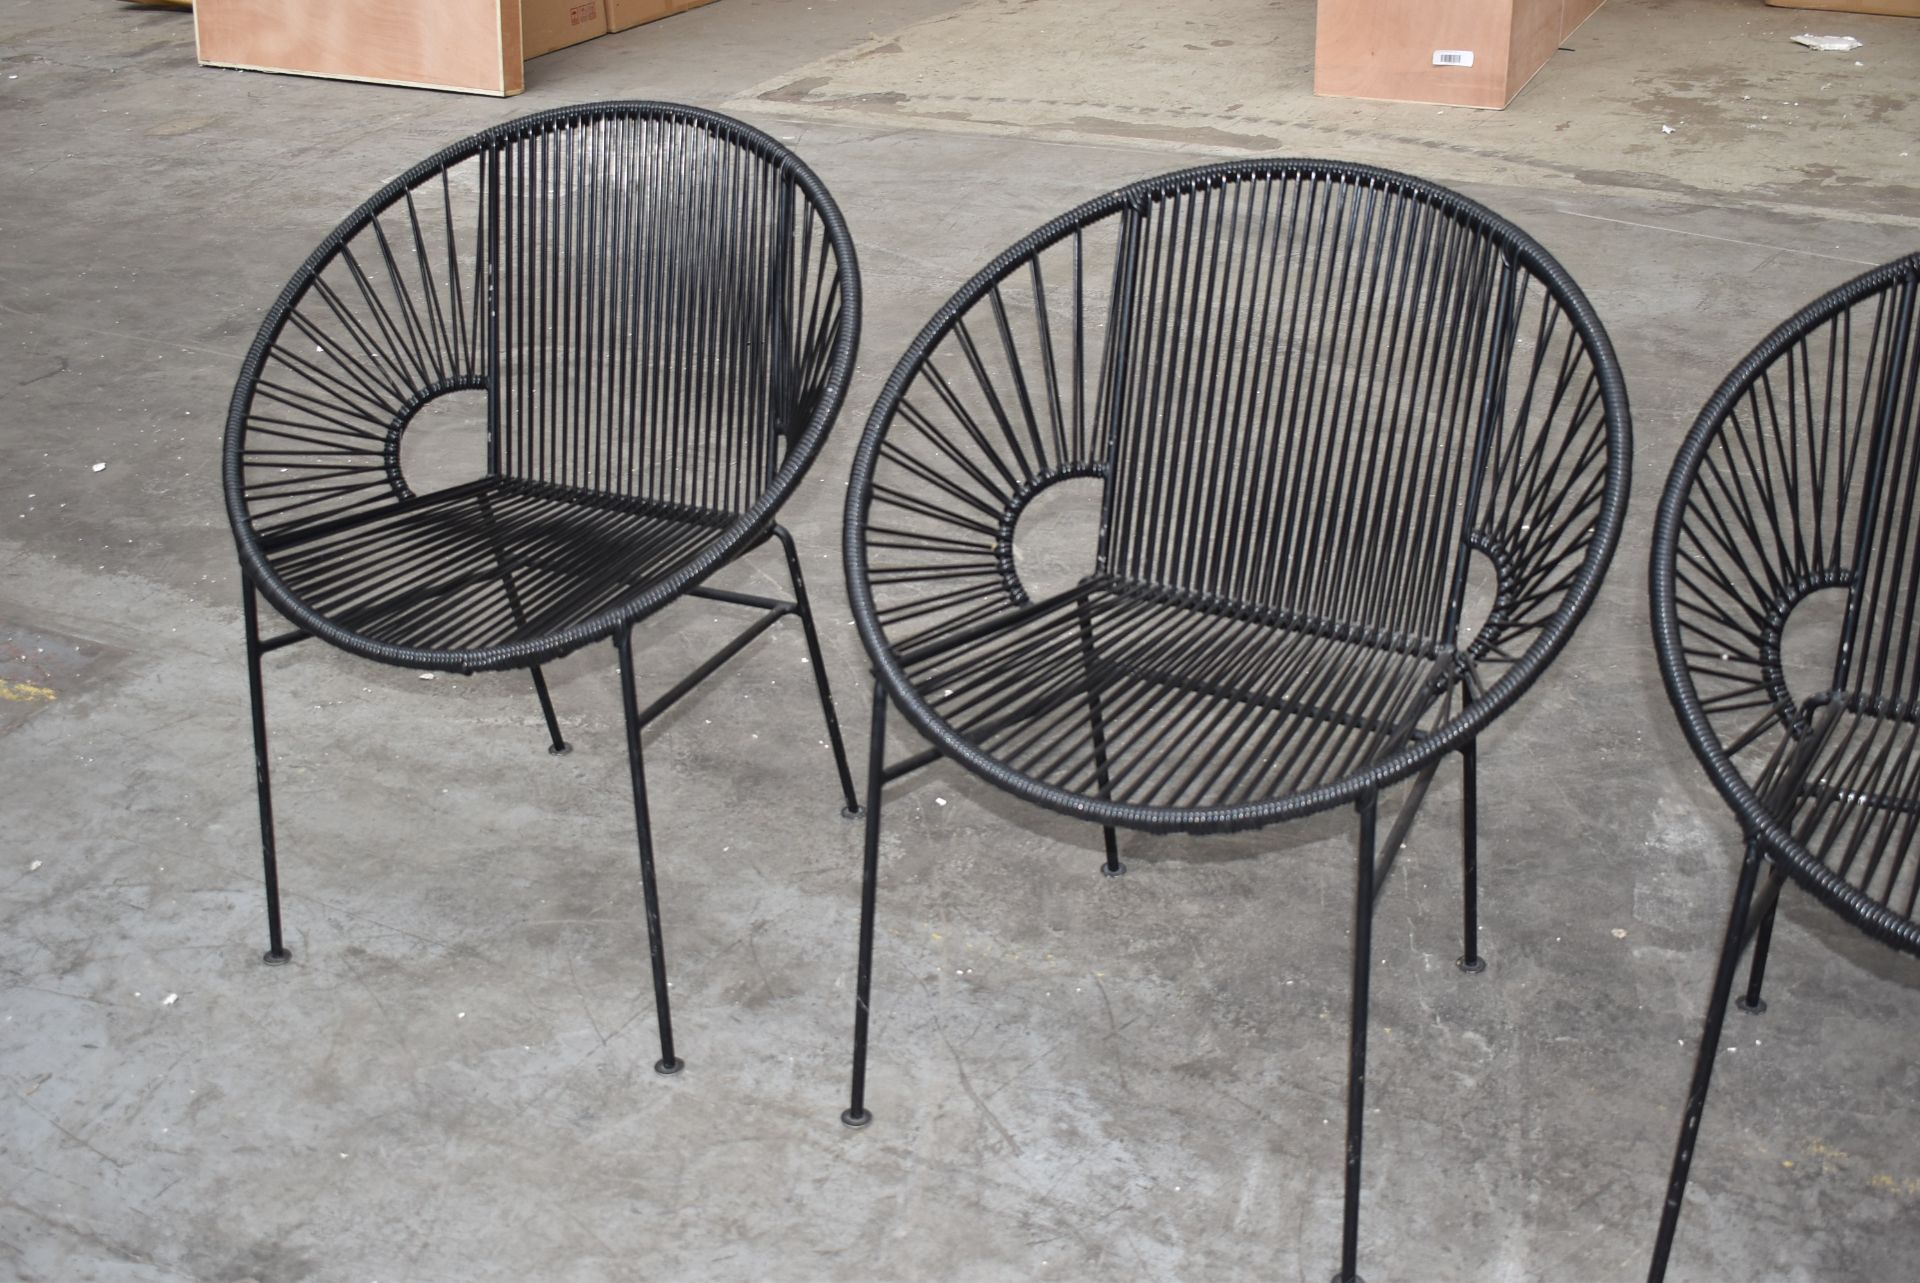 4 x Innit Designer Chairs - Acapulco Style Chairs in Black Suitable For Indoor or Outdoor Use - - Image 4 of 9